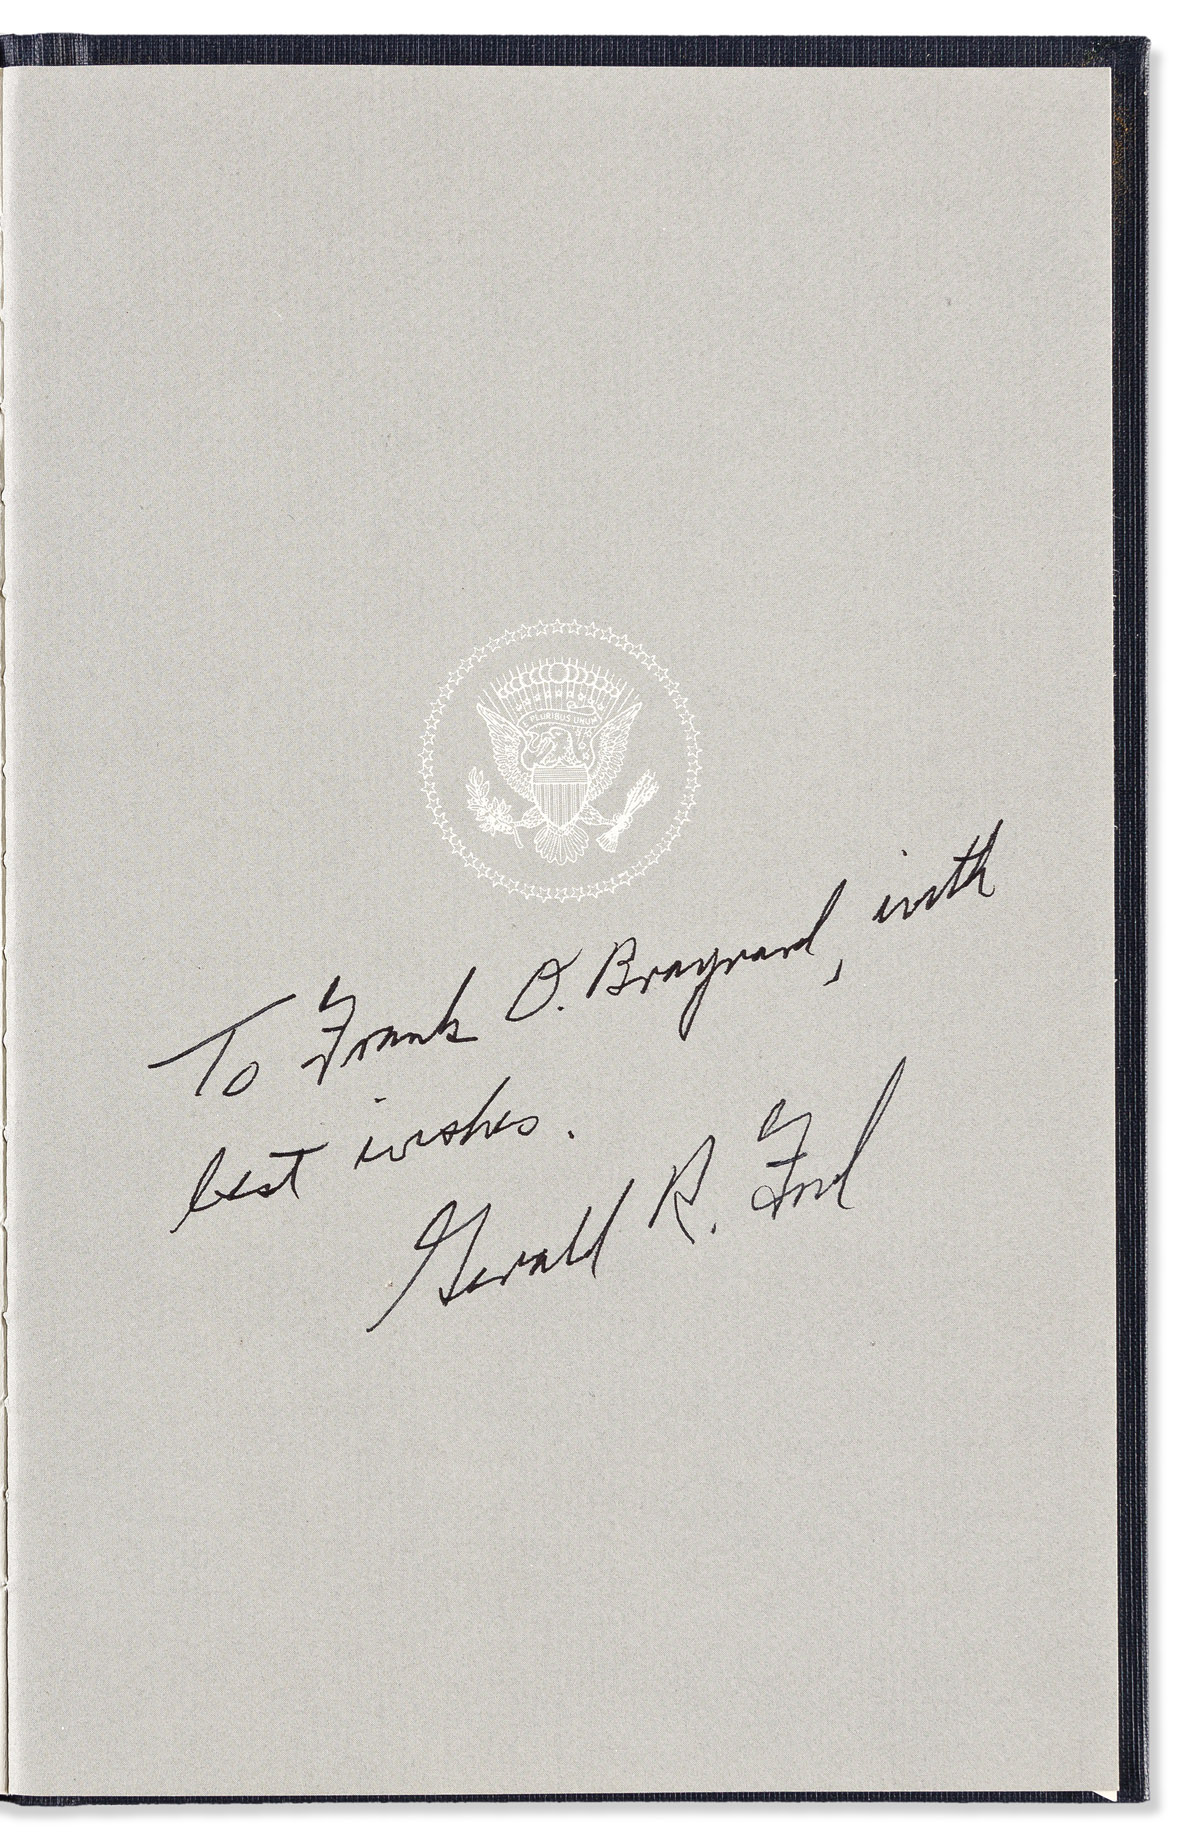 FORD, GERALD R. Three items, each Signed or Inscribed and Signed, Jerry Ford or Gerald R. Ford, as President, to maritime historian